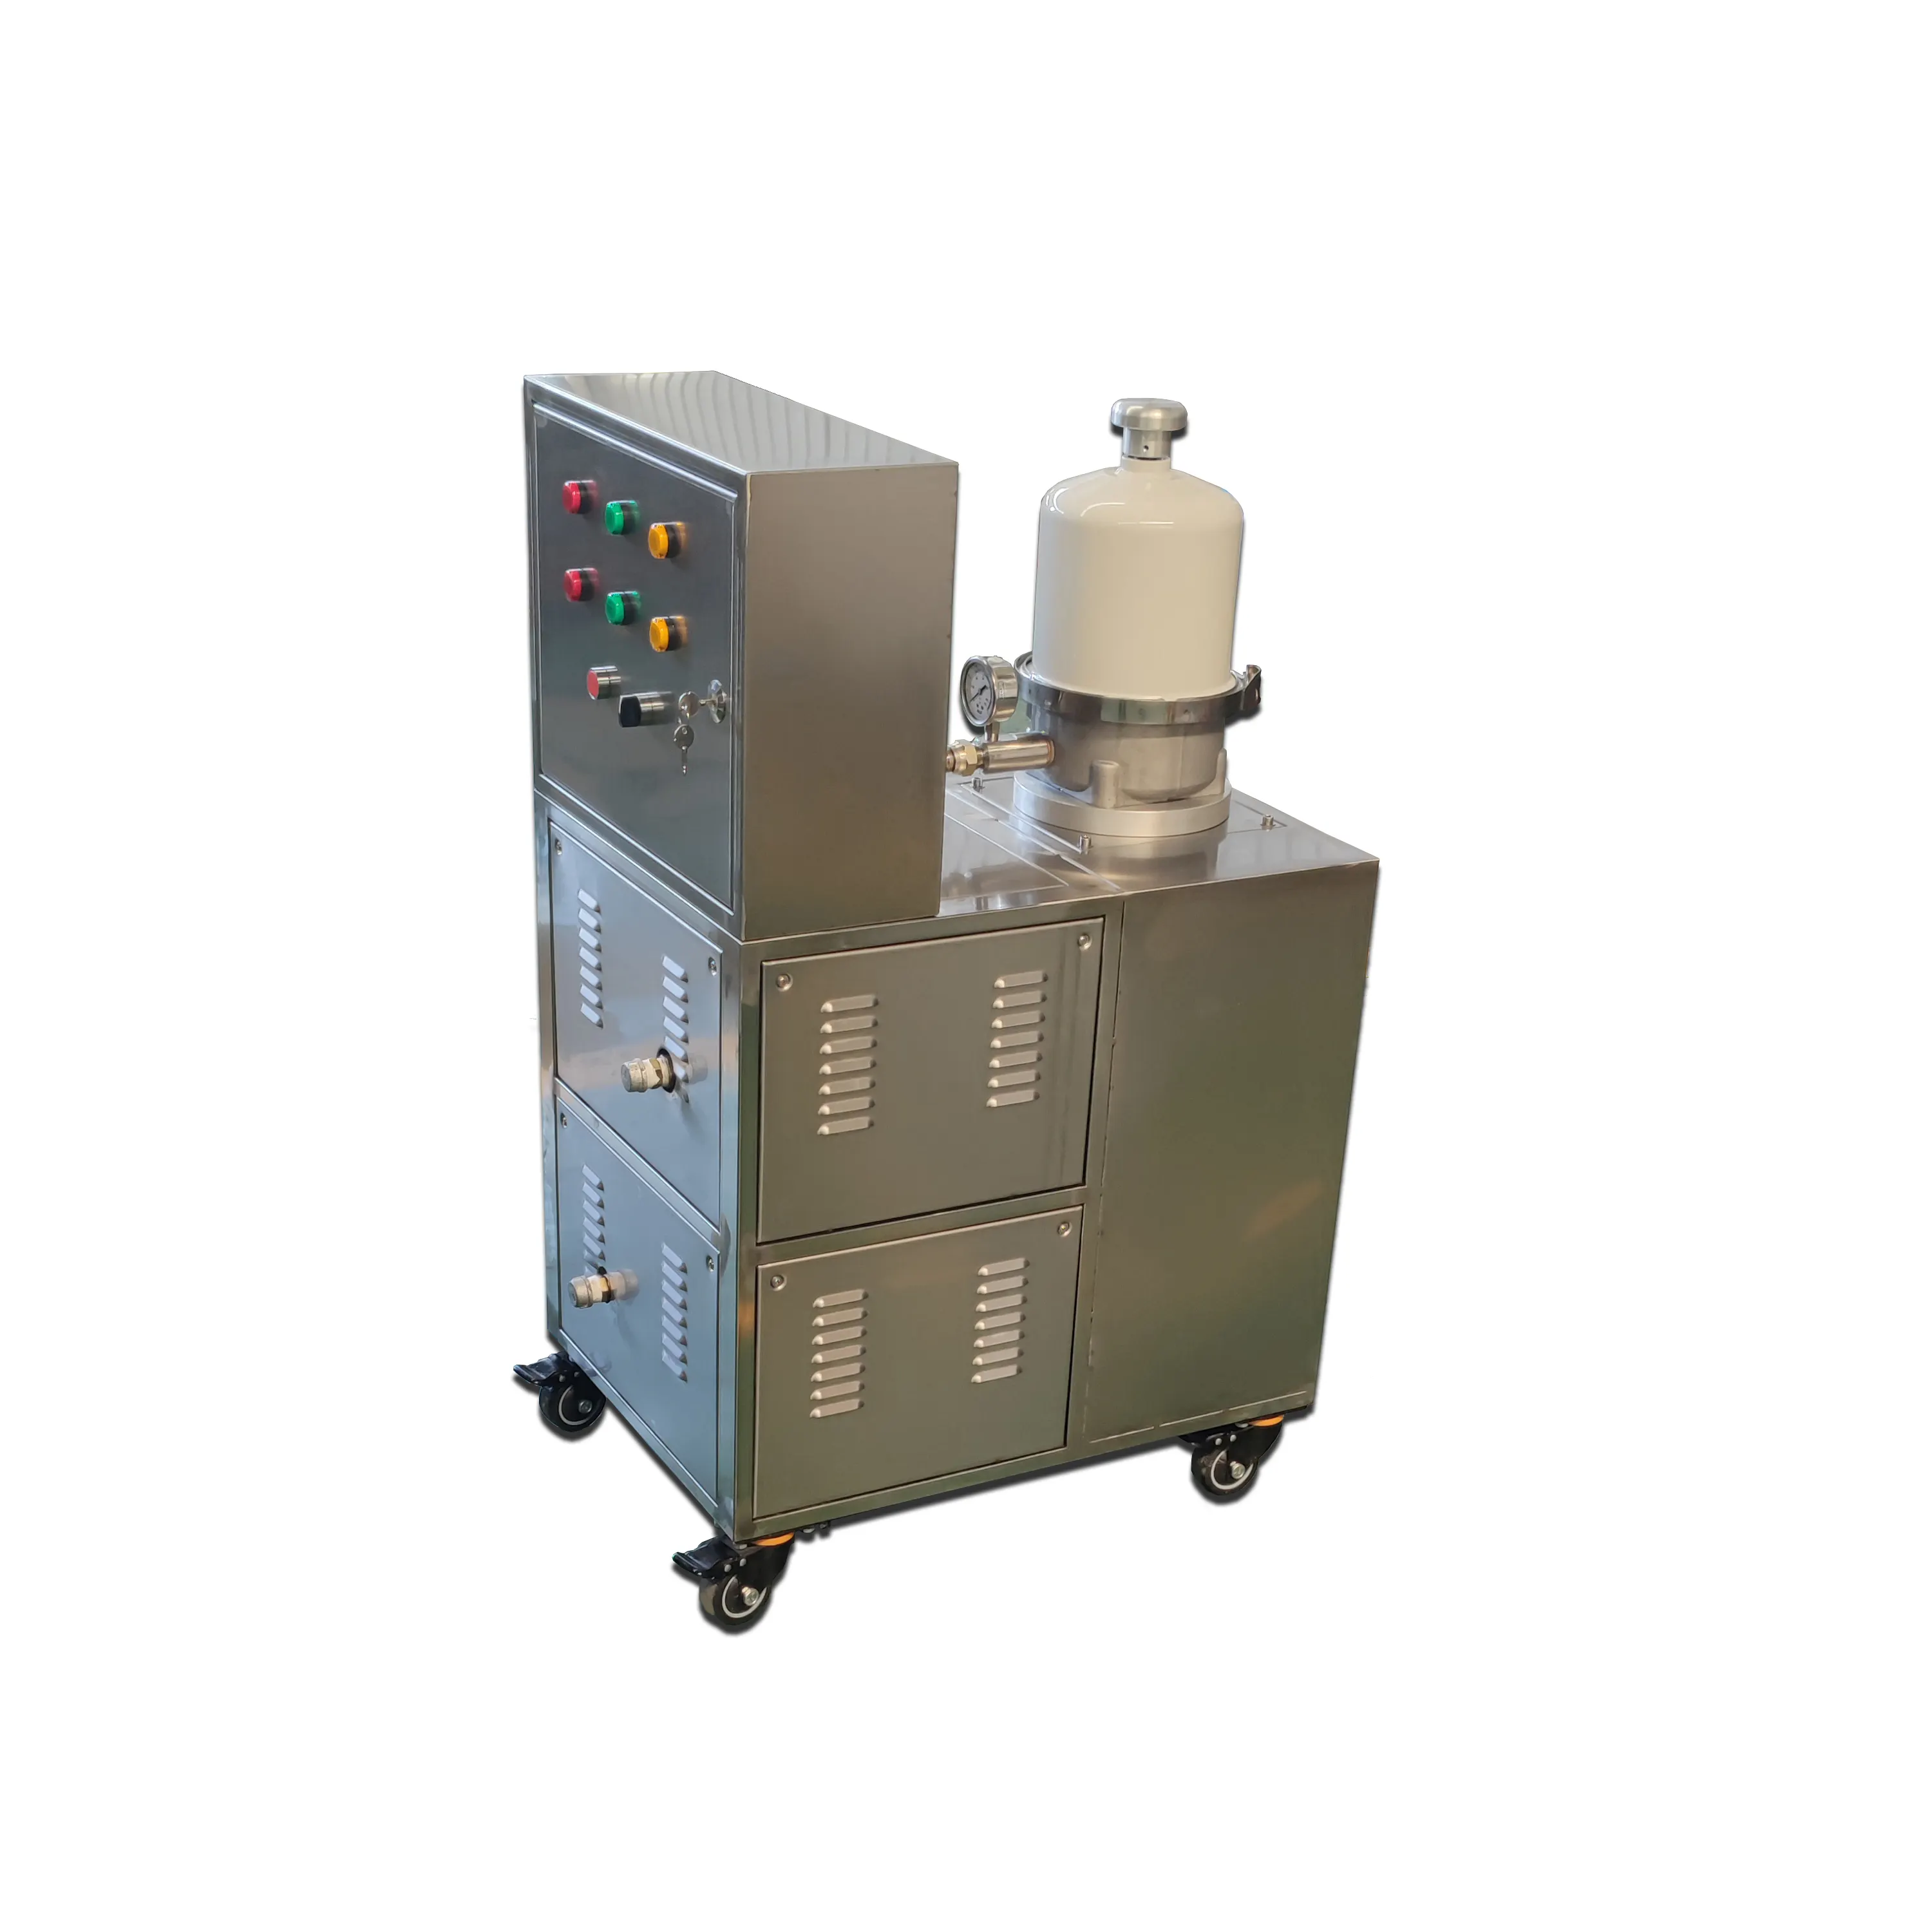 Oil purification machine for cleaning oil